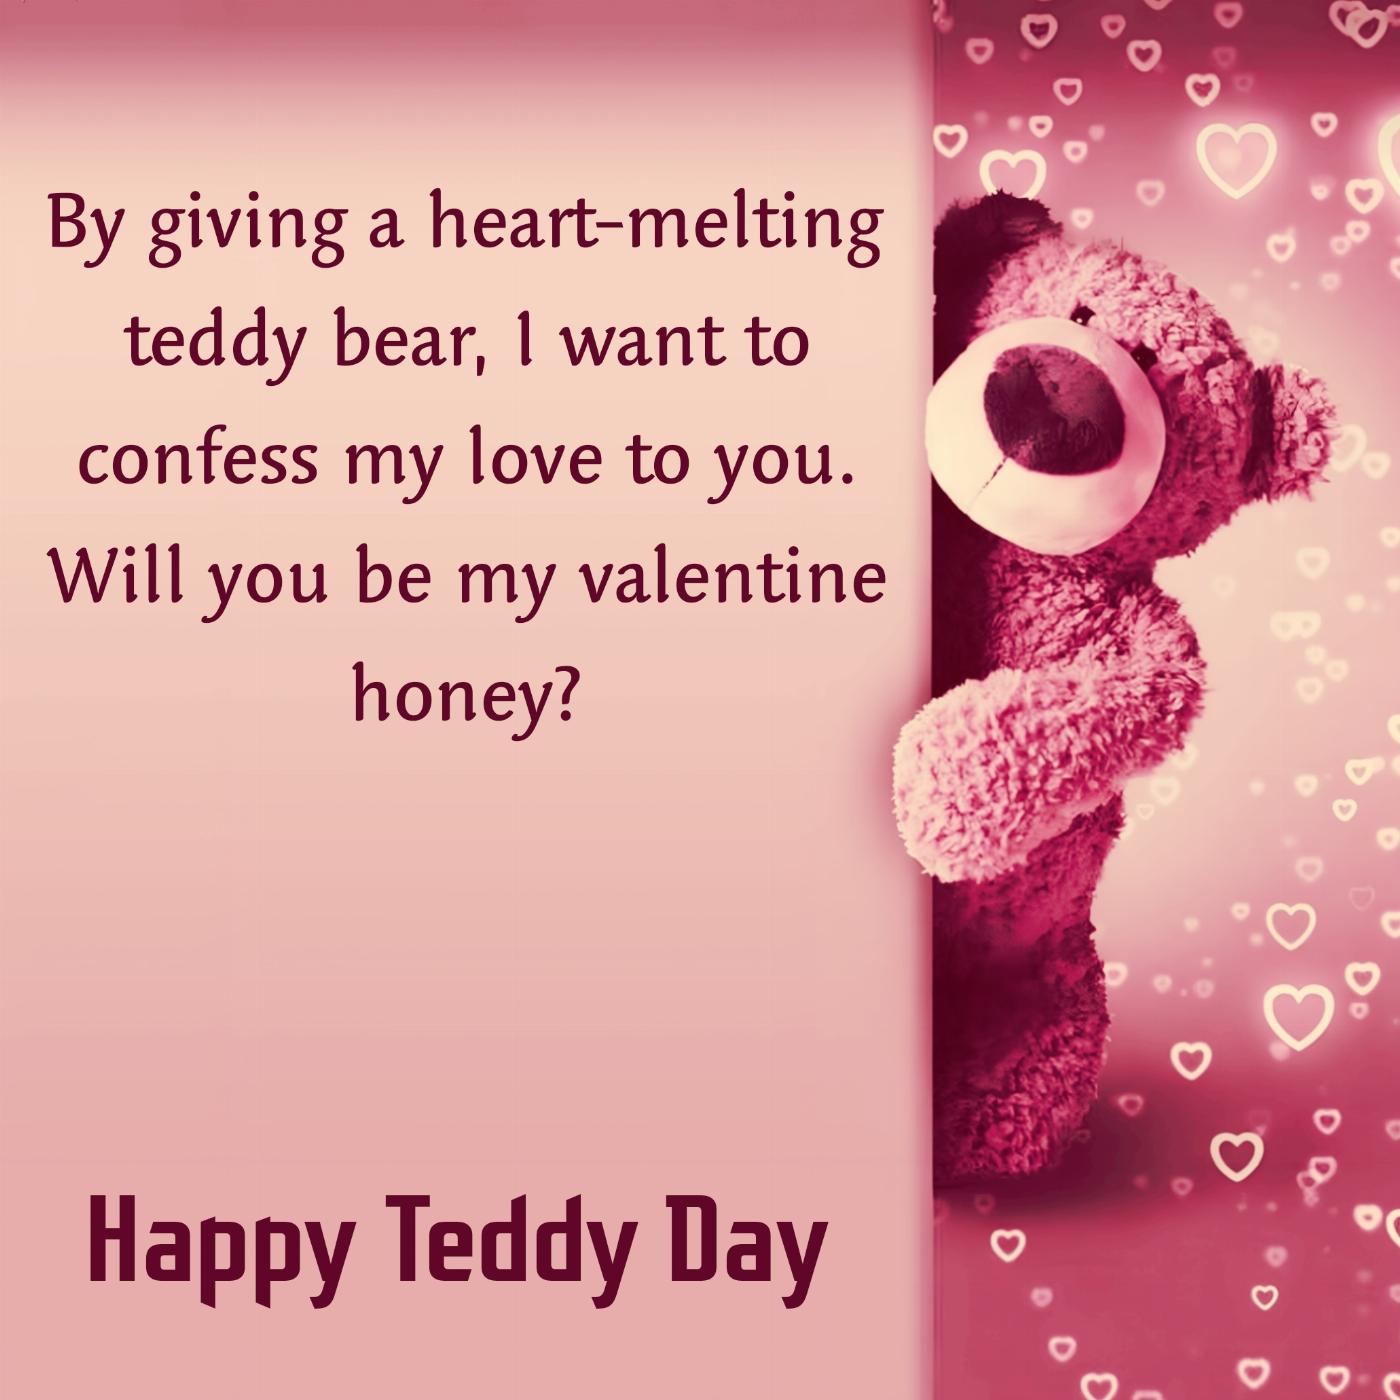 By giving a heart-melting teddy bear I want to confess my love